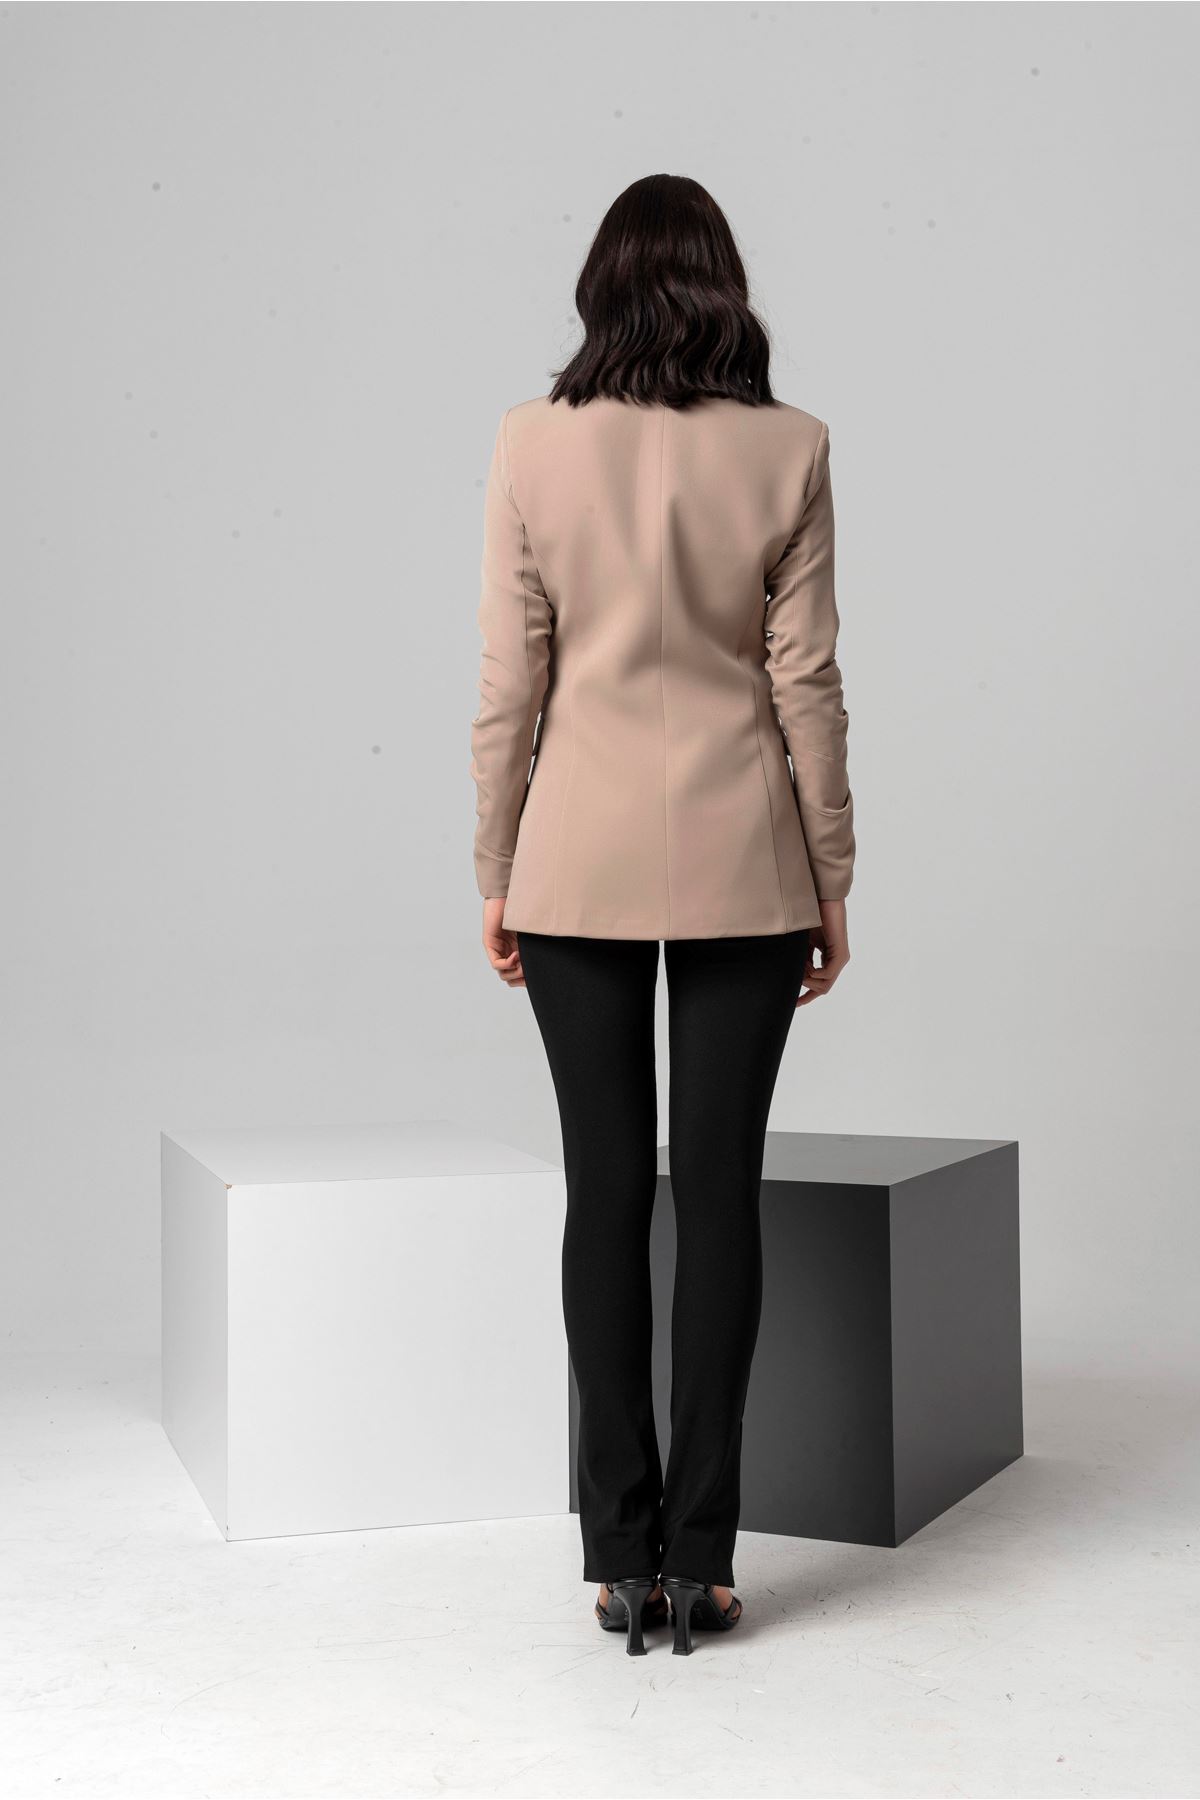 Polyester Fabric Hip Height Classical Shirred Sleeve Women Jacket - Beige 